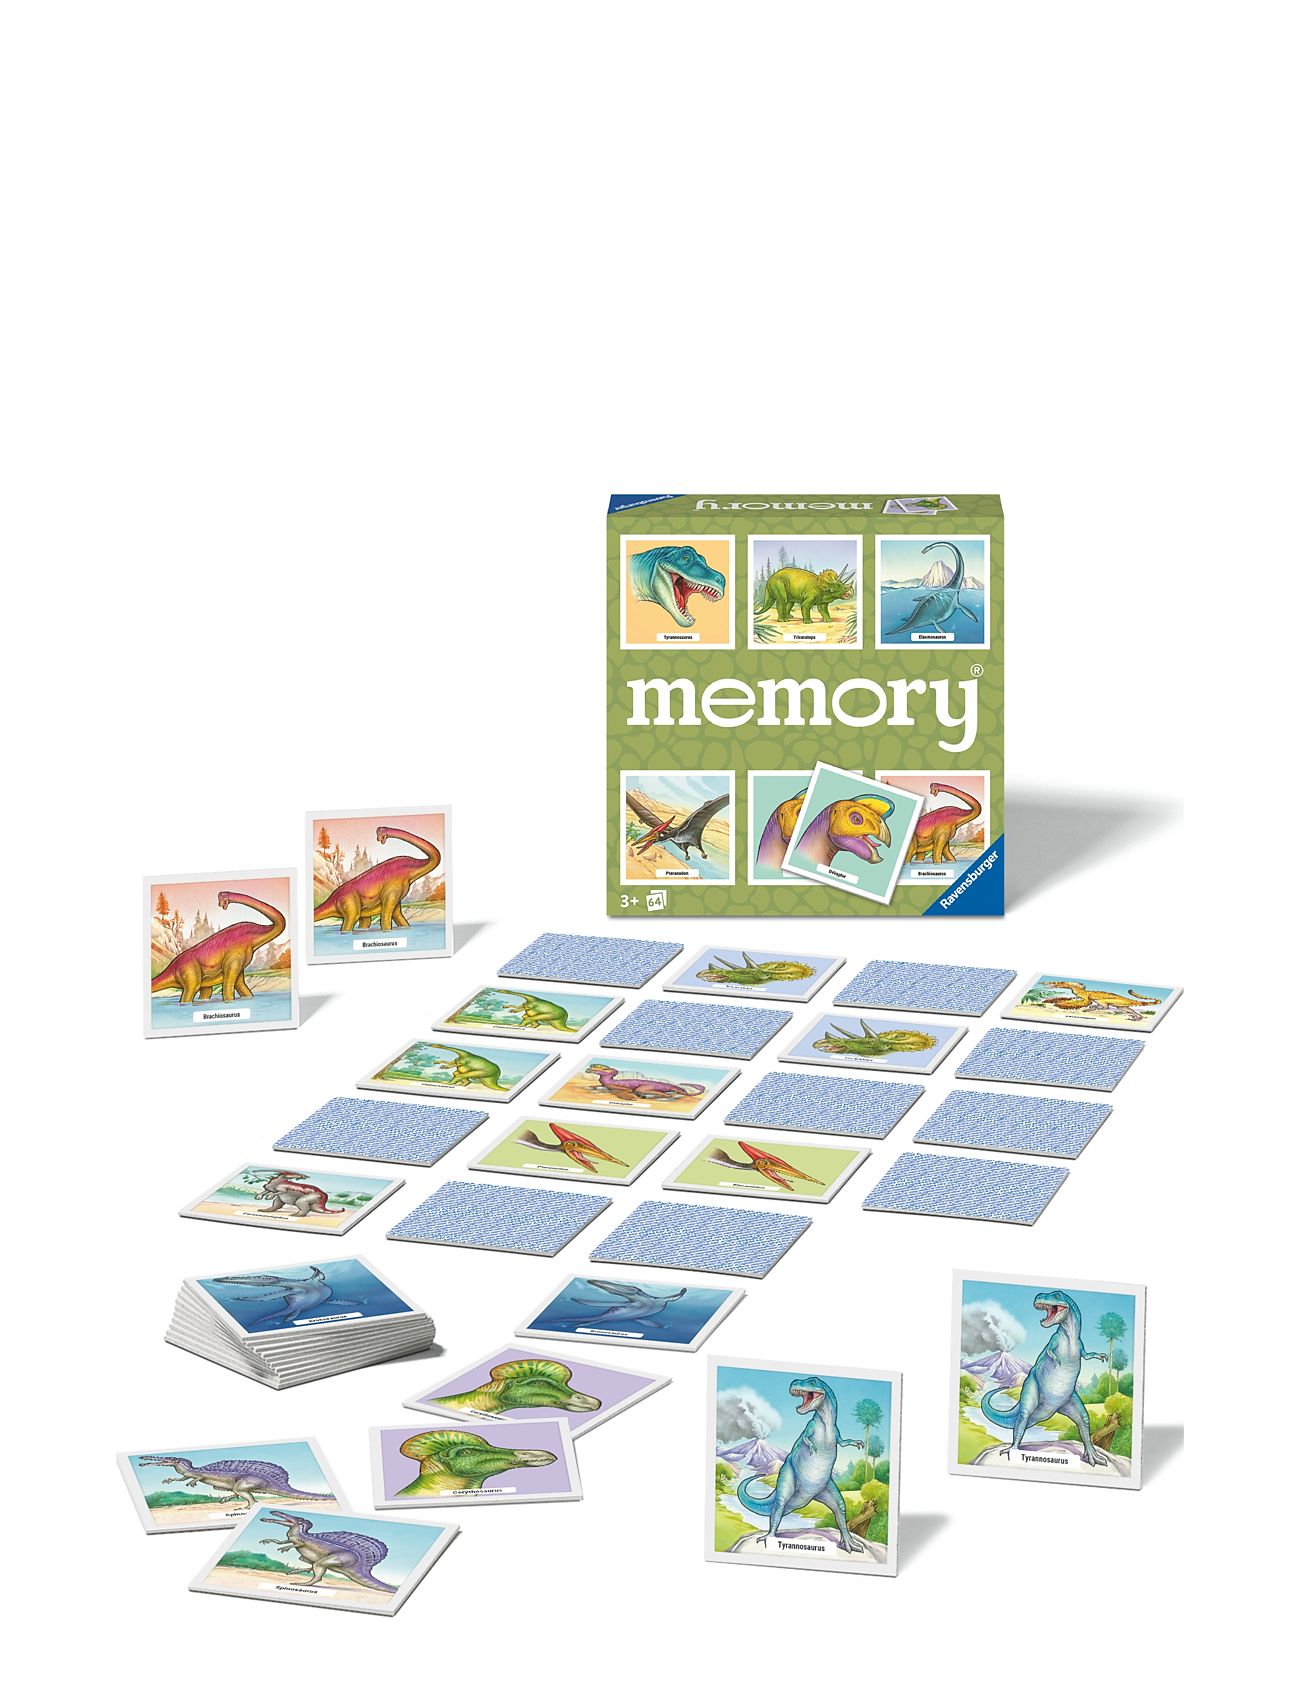 Dinosaur Memory Toys Puzzles And Games Puzzles Classic Puzzles Multi/patterned Ravensburger